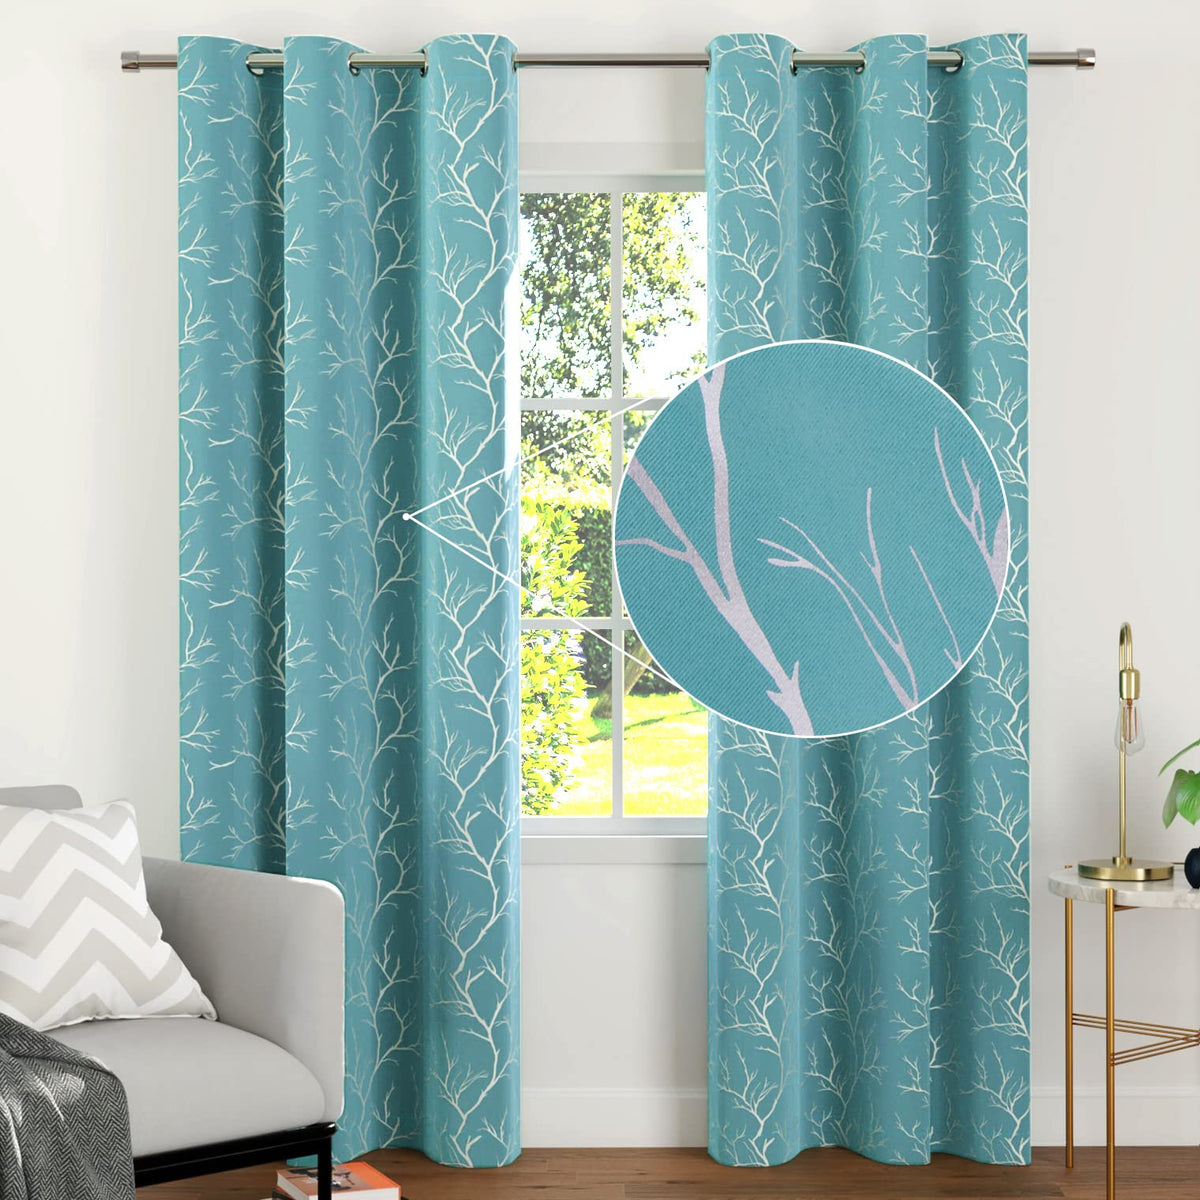 Encasa Homes Room Darkening Blackout Curtains 2 Panels Silver Foil Printed Plain Colours for Kids Bedroom, Living Room with Grommet, 85% Light Blocking, Sound & Heat Reducing, 7 ft -Twigs Teal